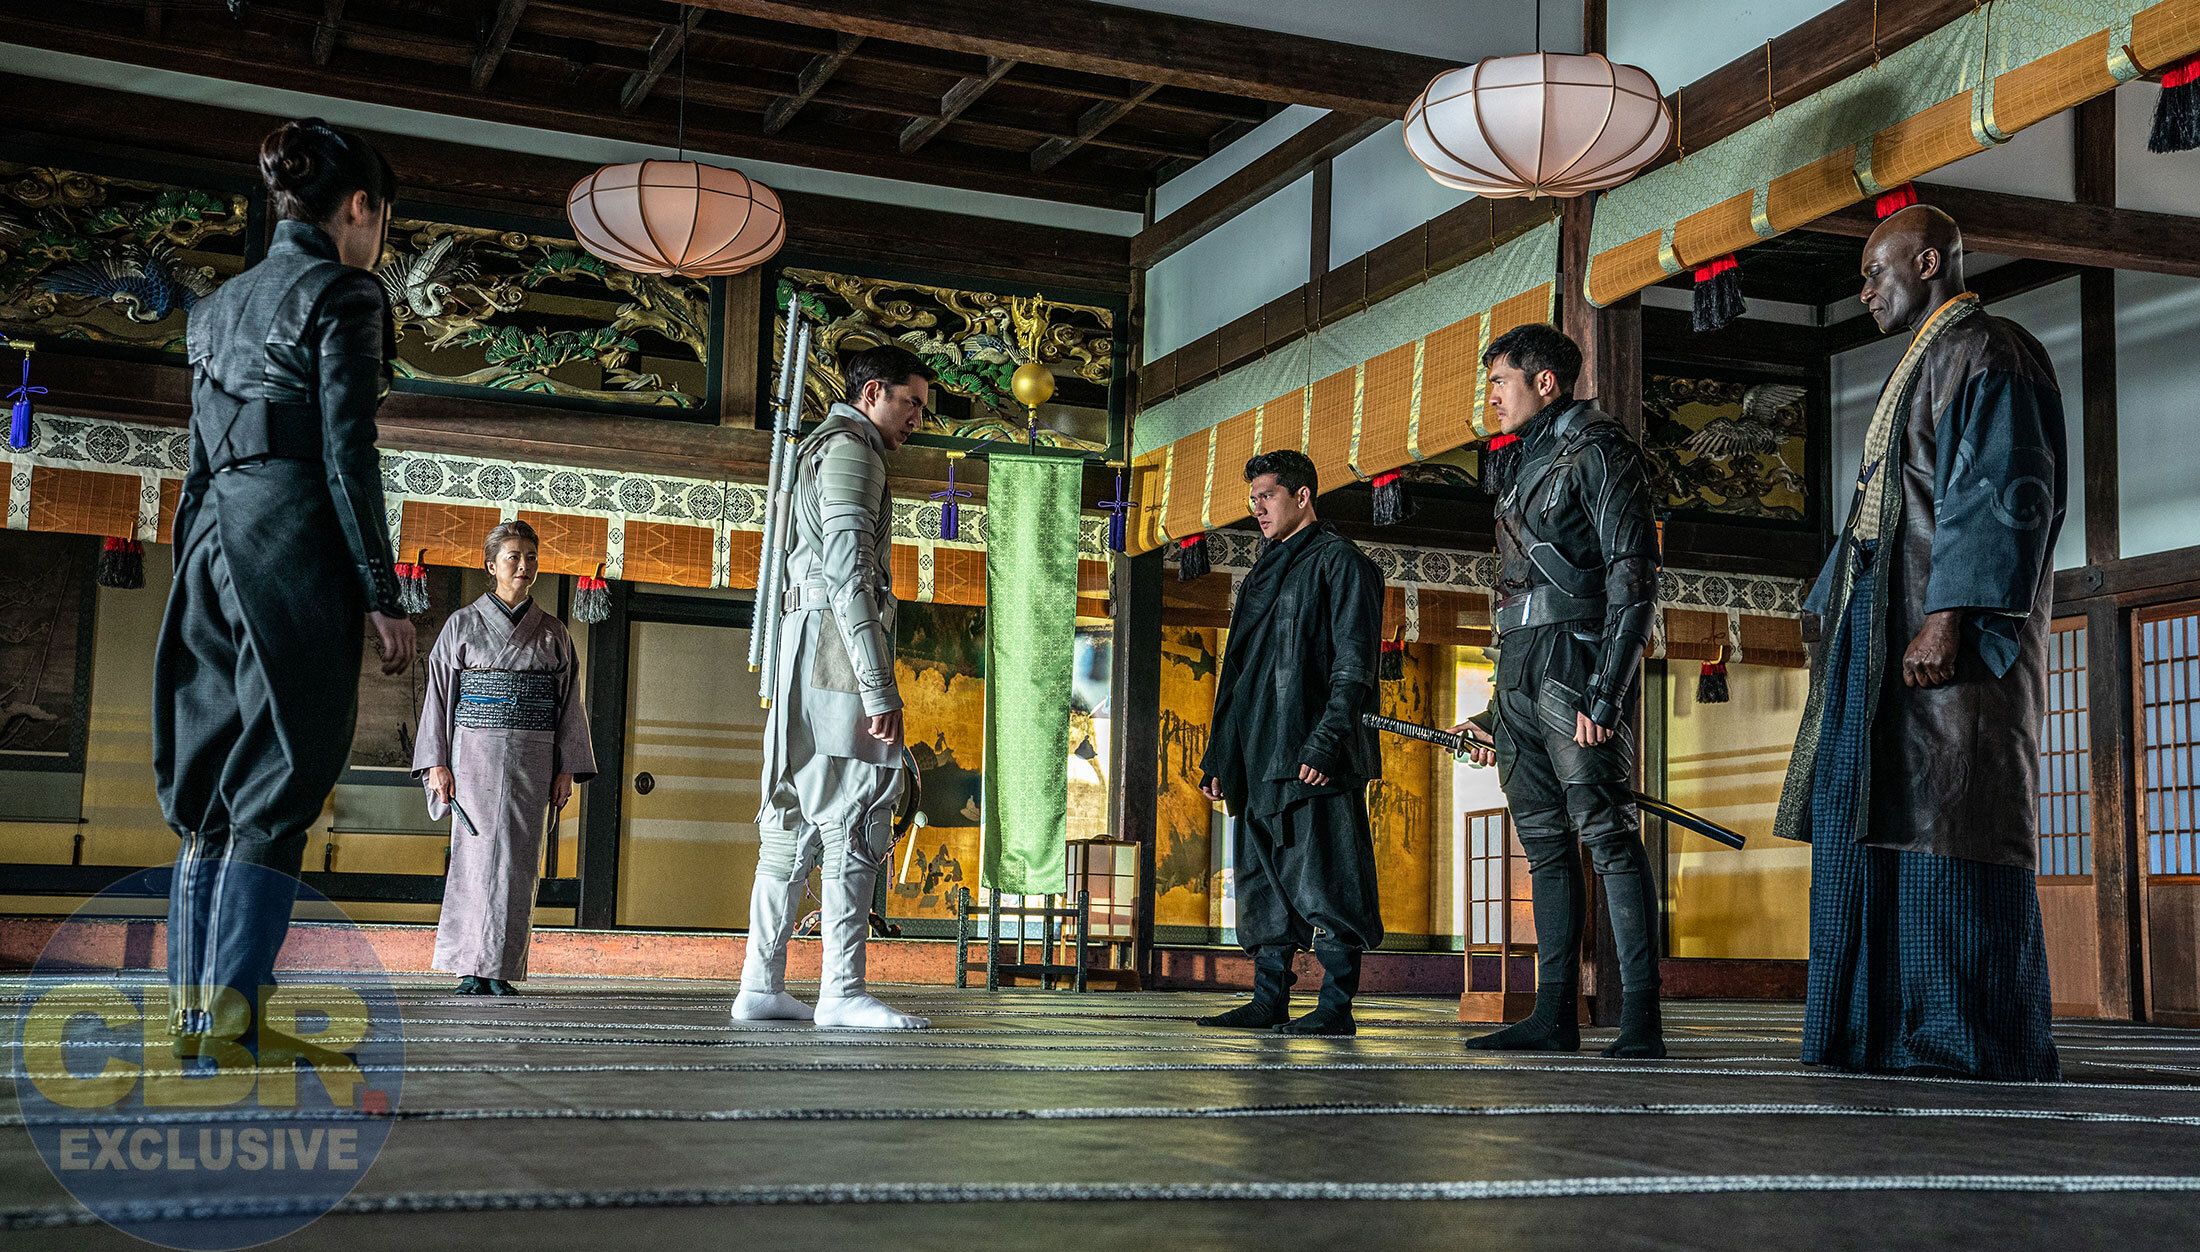 Snake Eyes engages in a staredown with Storm Shadow (Andrew Koji), while Hard Master (Iko Uwais) and Blind Master (Peter Mensah) flank him on either side.